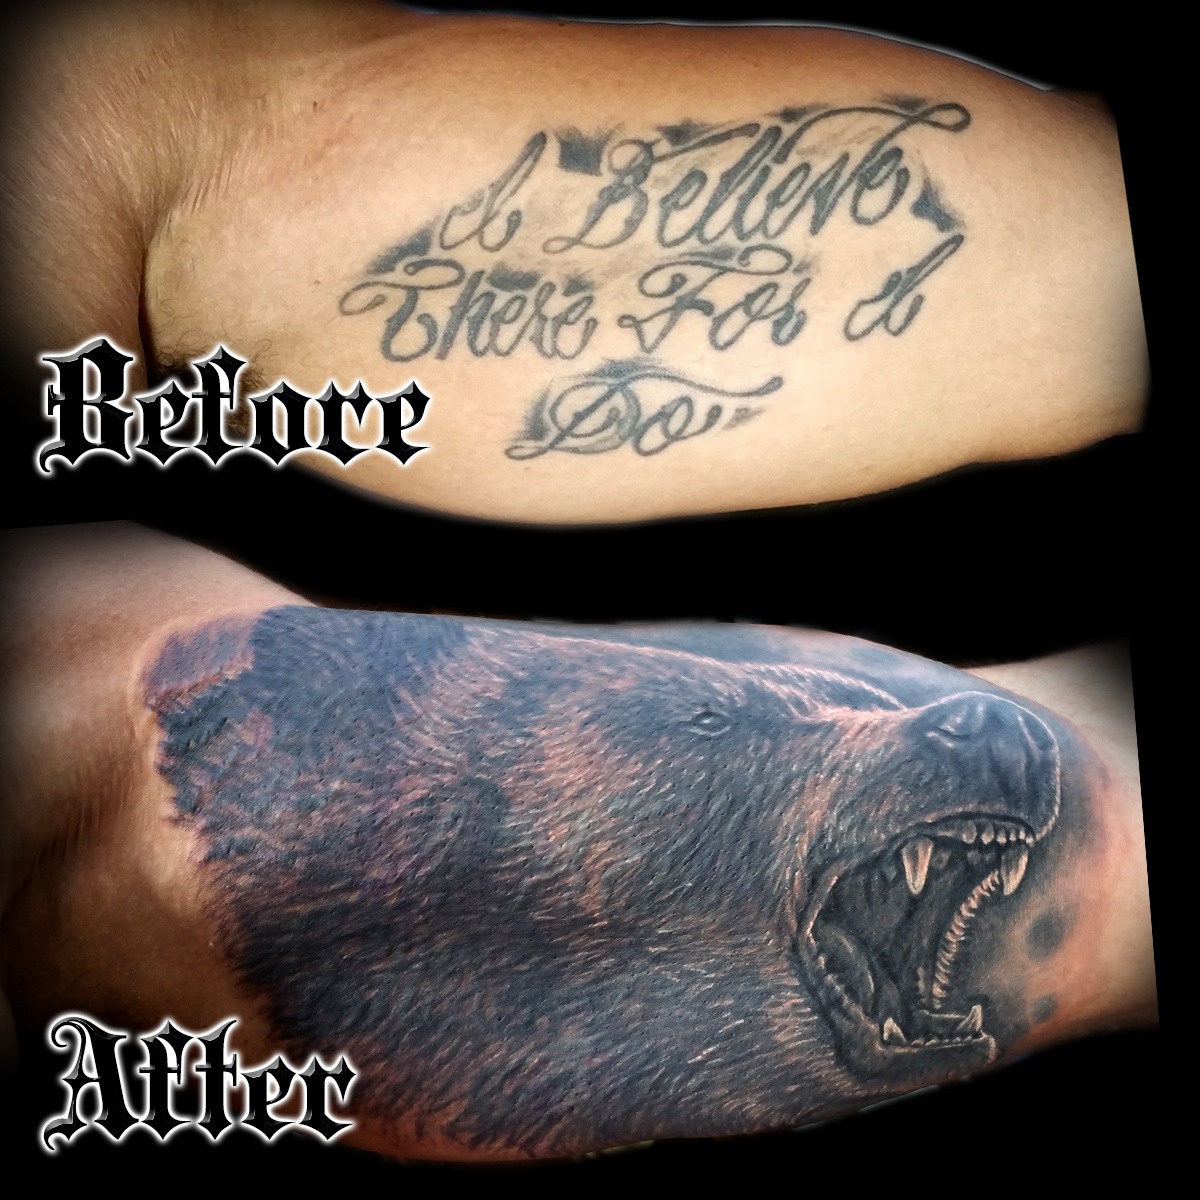 Rock'n'roll Tattoo and Piercing Dundee - Check out this realistic bear  tattoo by our resident artist Tomek T! Tomek T specialises mainly in black  & grey realism. If you like what you